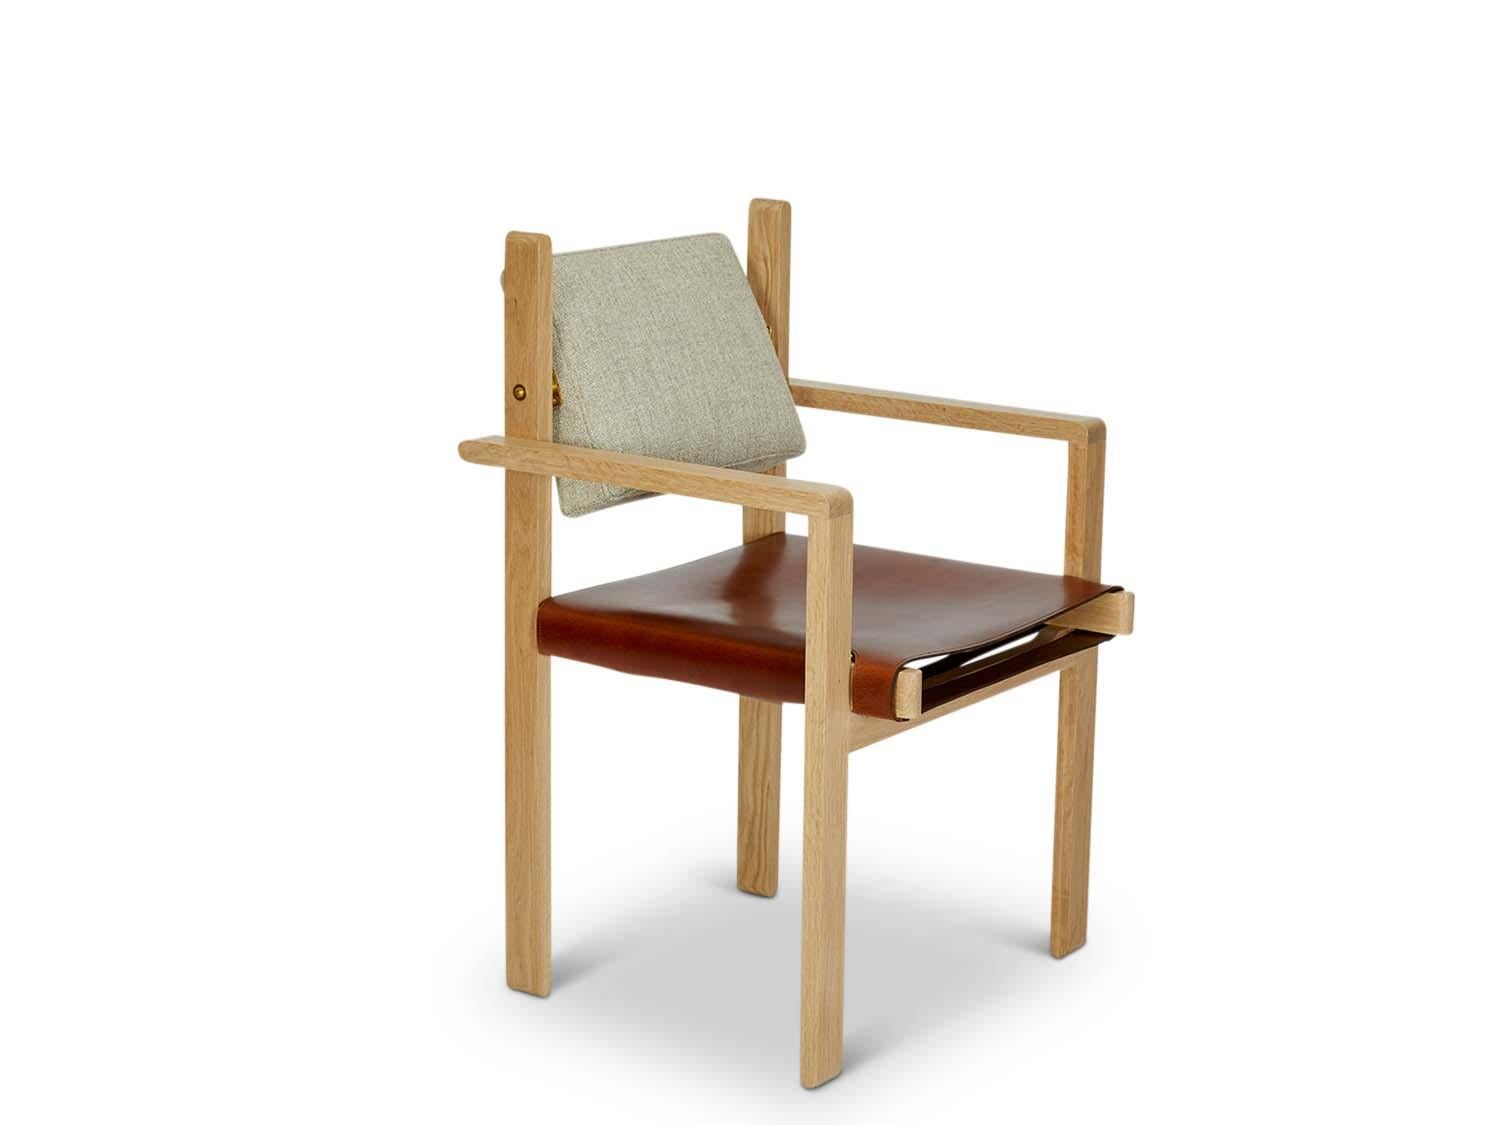 The Morro dining chair is made from a solid American walnut or white oak frame and features an upholstered back cushion and a leather sling seat.

The Lawson-Fenning Collection is designed and handmade in Los Angeles, California. Reach out to